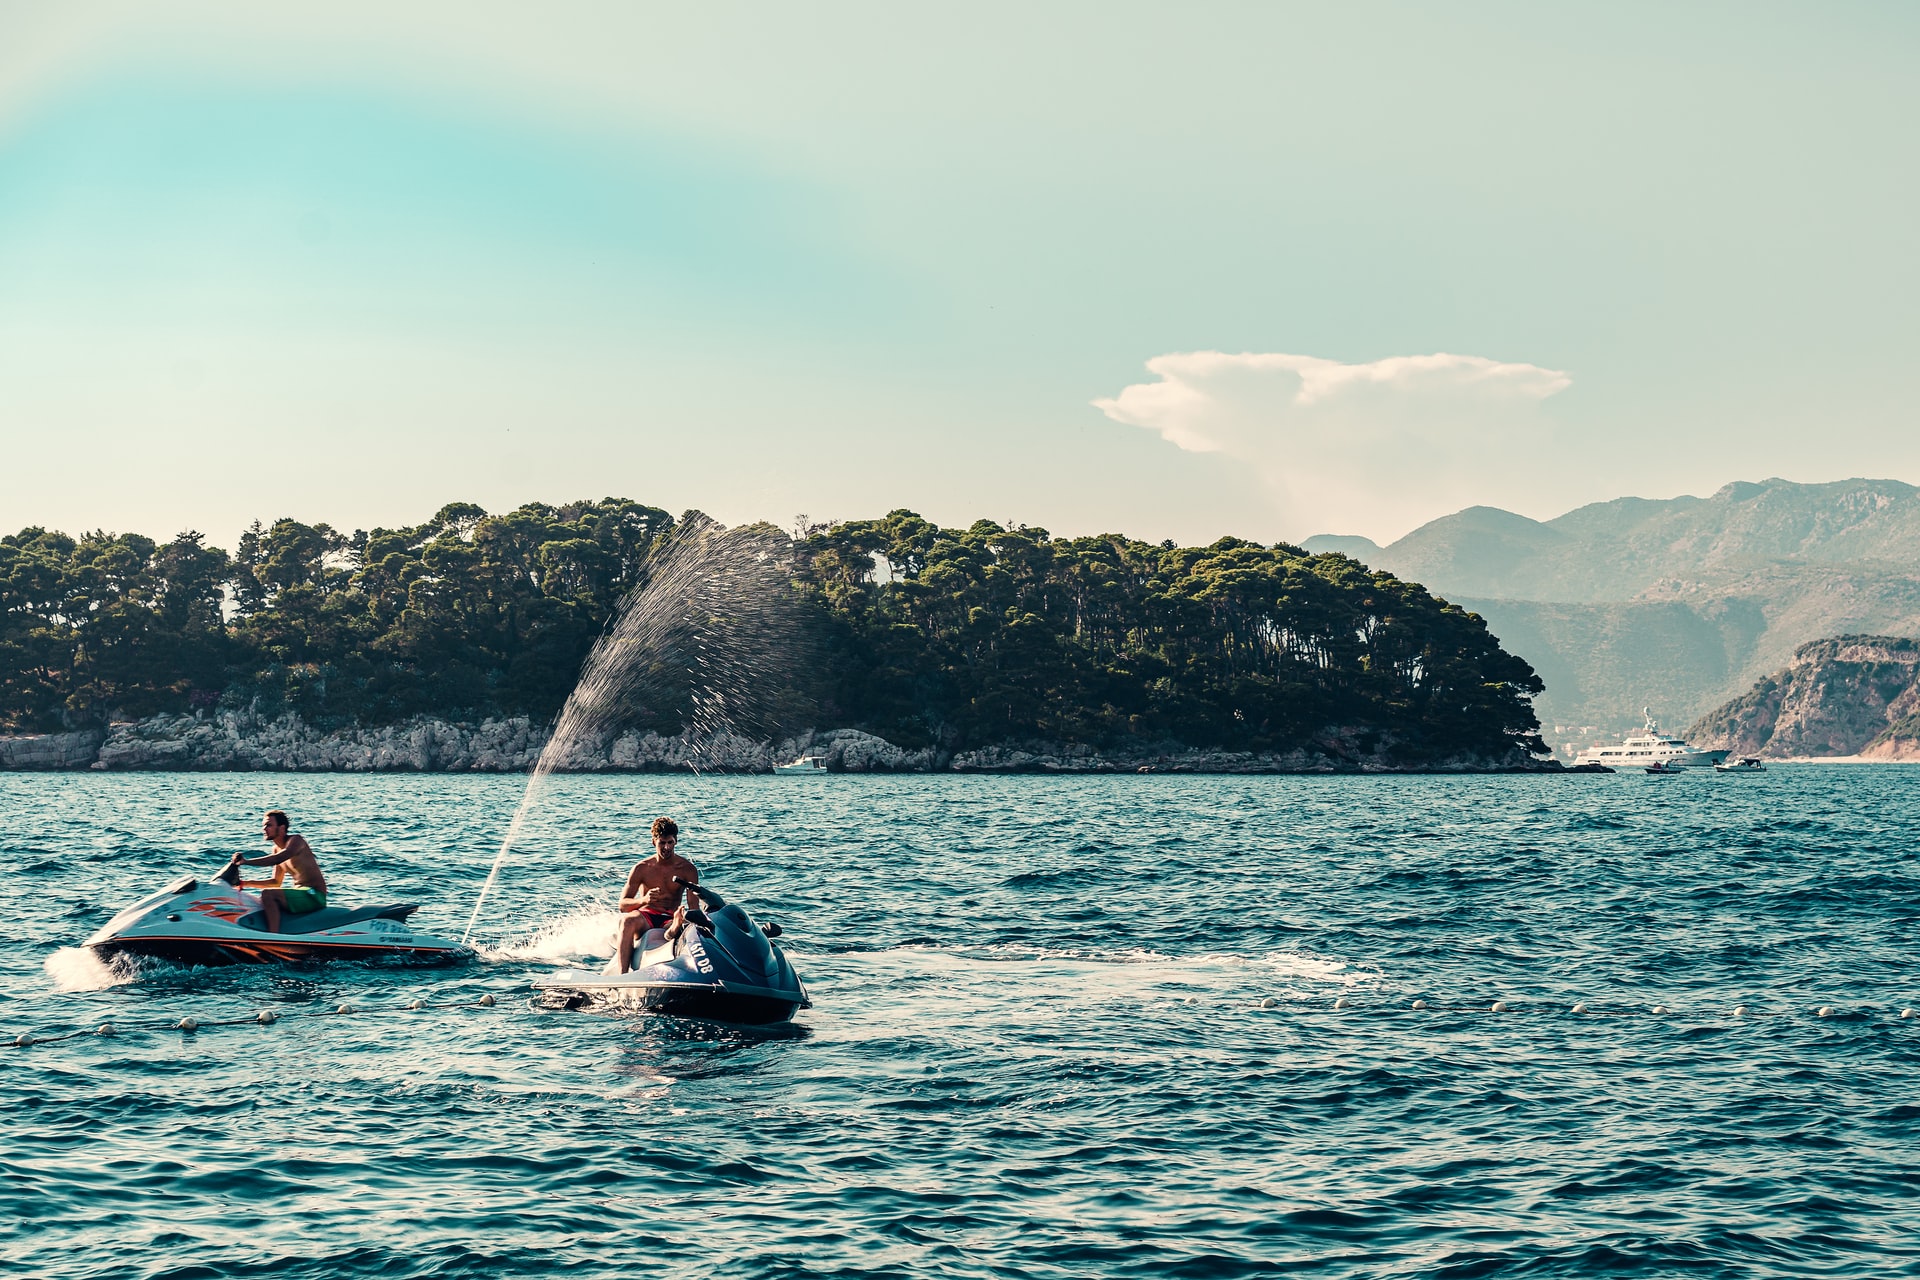 How Far Can A Jet Ski Go Offshore?